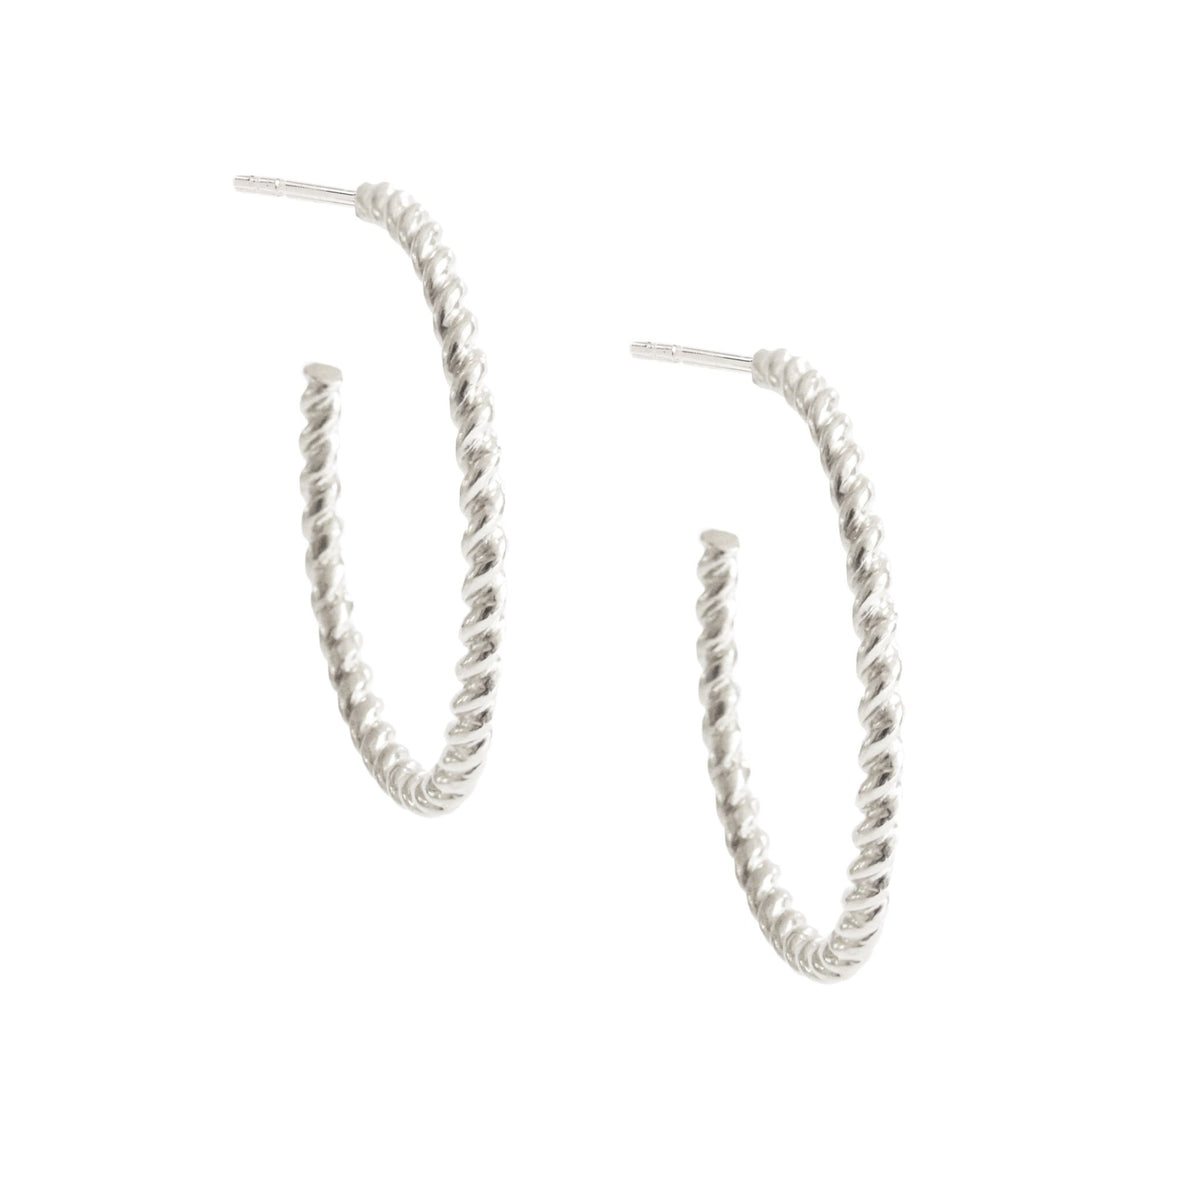 POISE CABLE LINK HOOPS - SILVER - SO PRETTY CARA COTTER